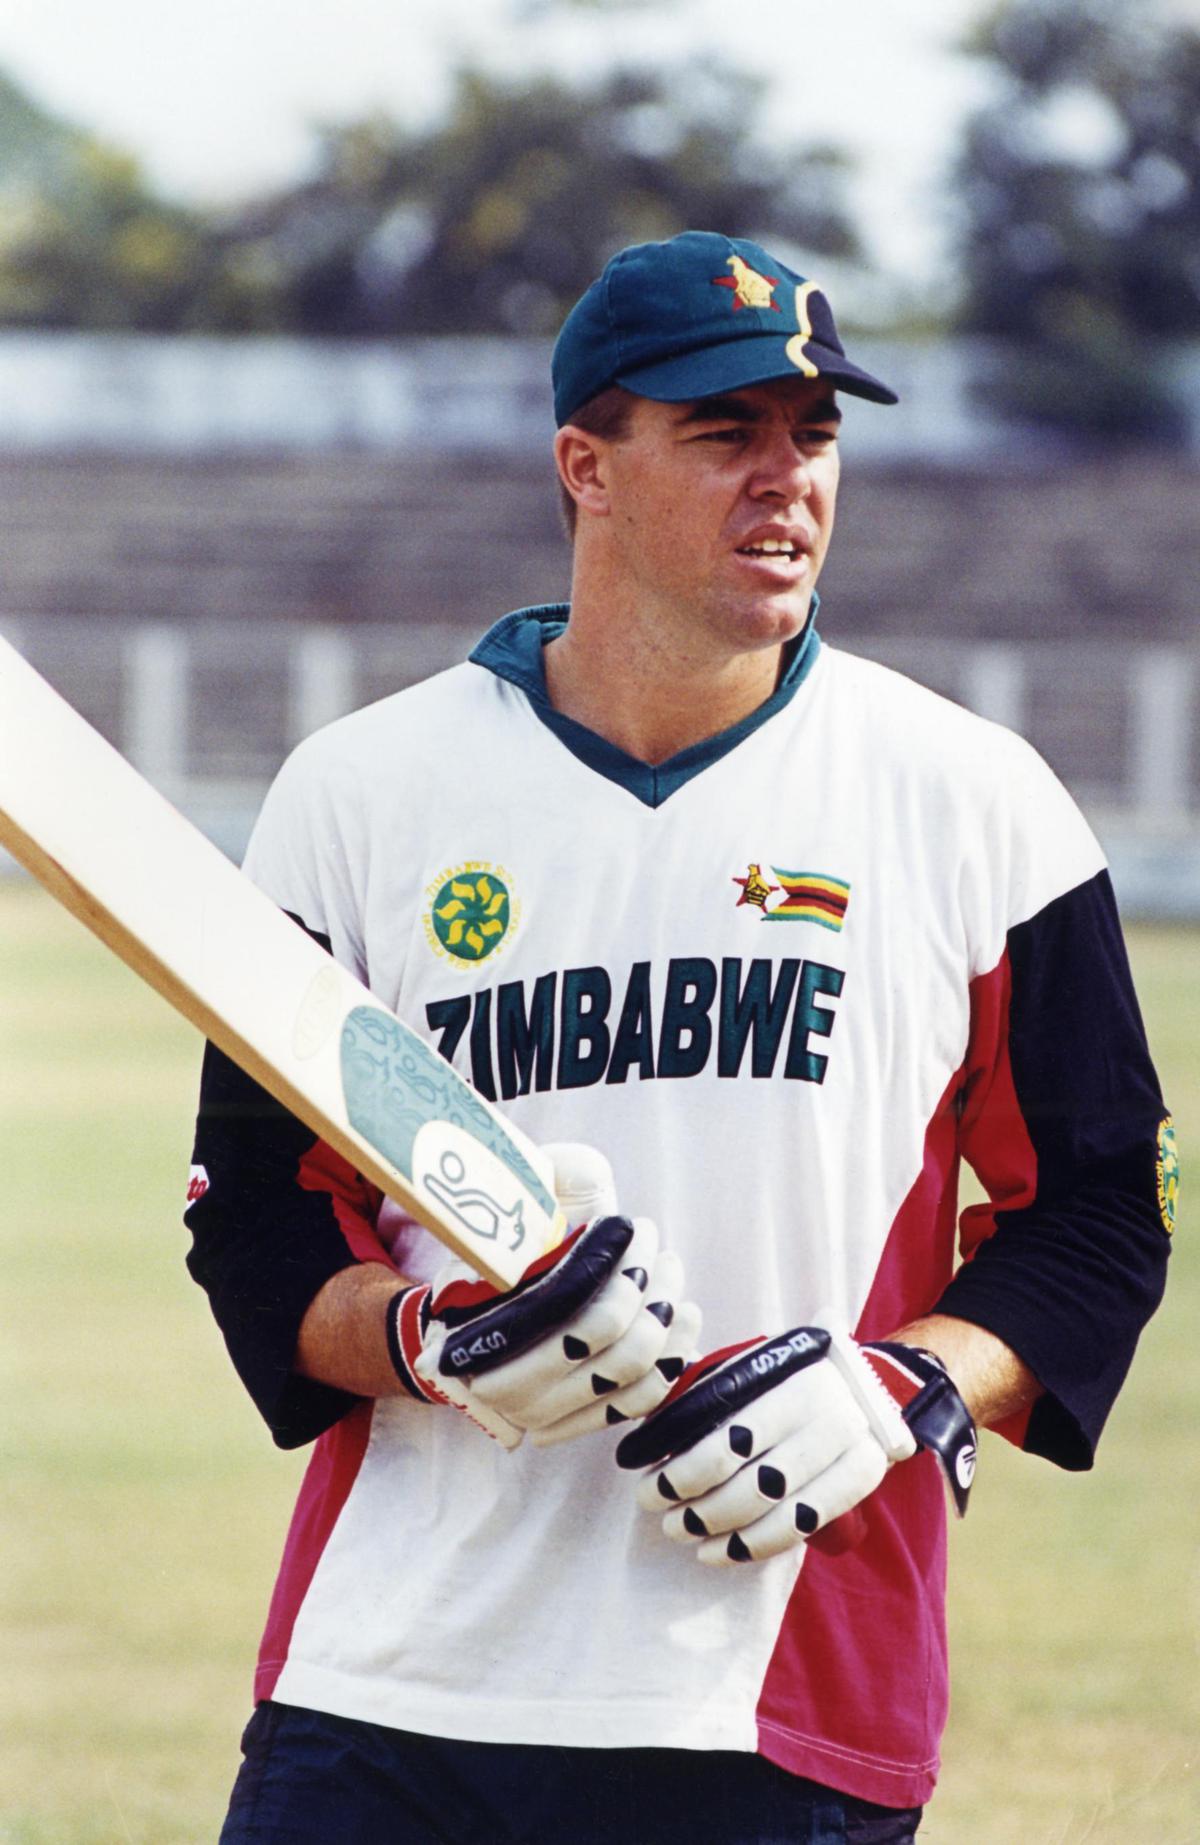 The then Zimbabwe skipper Heath Streak seen in a batting practice session in New Delhi on November 17, 2000, on the eve of the first Test Cricket match between India and Zimbabwe played from November 18 to 22, 2000. India won by 7 wickets.